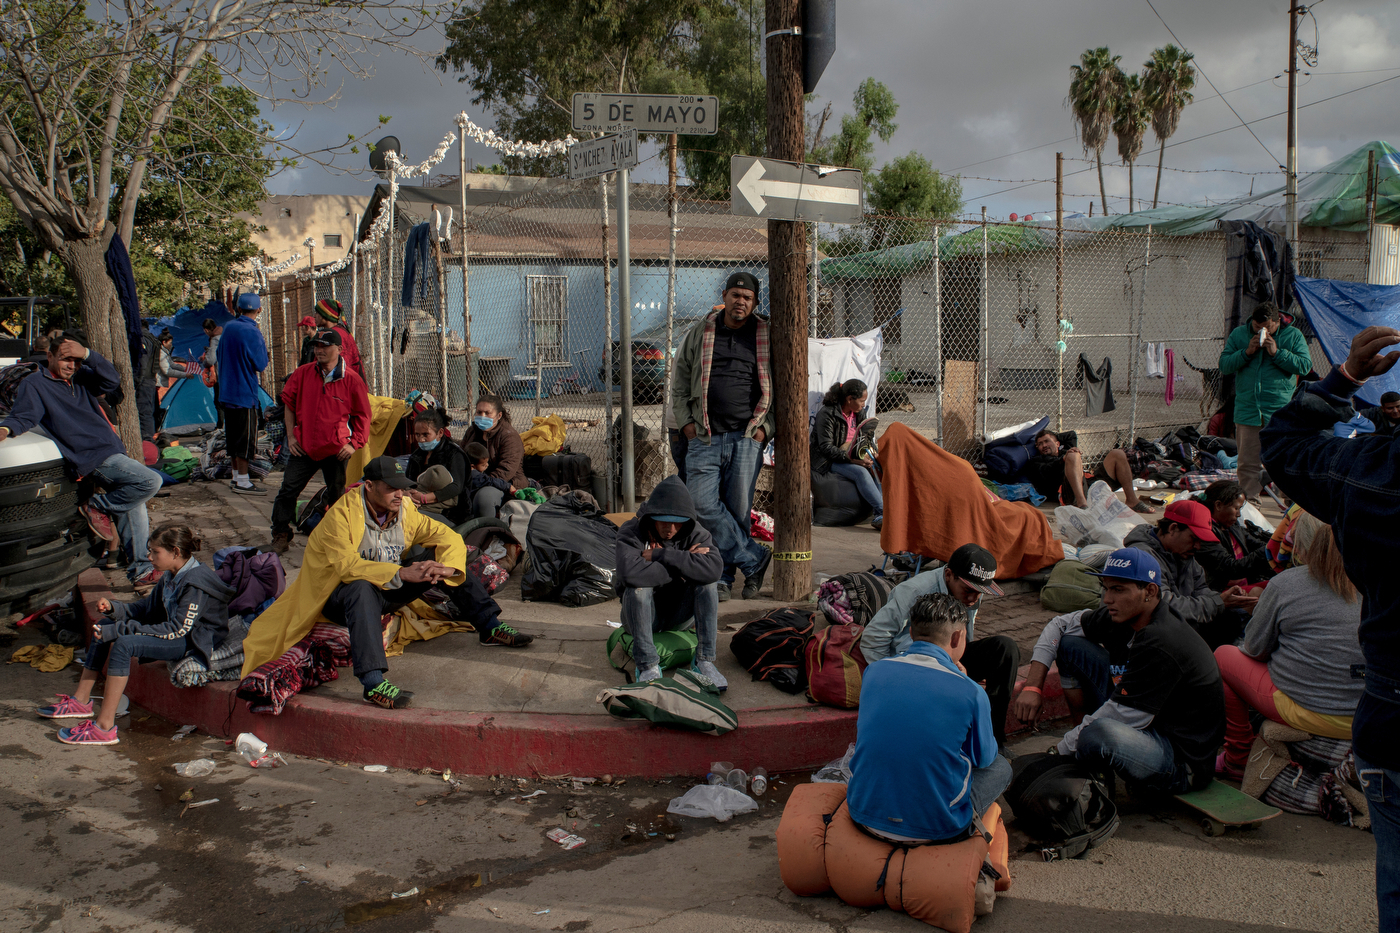 A group of migrants wait before being transferred to a different temporary shelter in Tijuana, Mexico on November 30, 2018. Mexican officials required all the migrants to leave the Benito Juarez encampment due to safety and hygienic concerns and move instead to the outskirts of Tijuana to the El Barretal complex. Photo by Kitra Cahana / MAPS